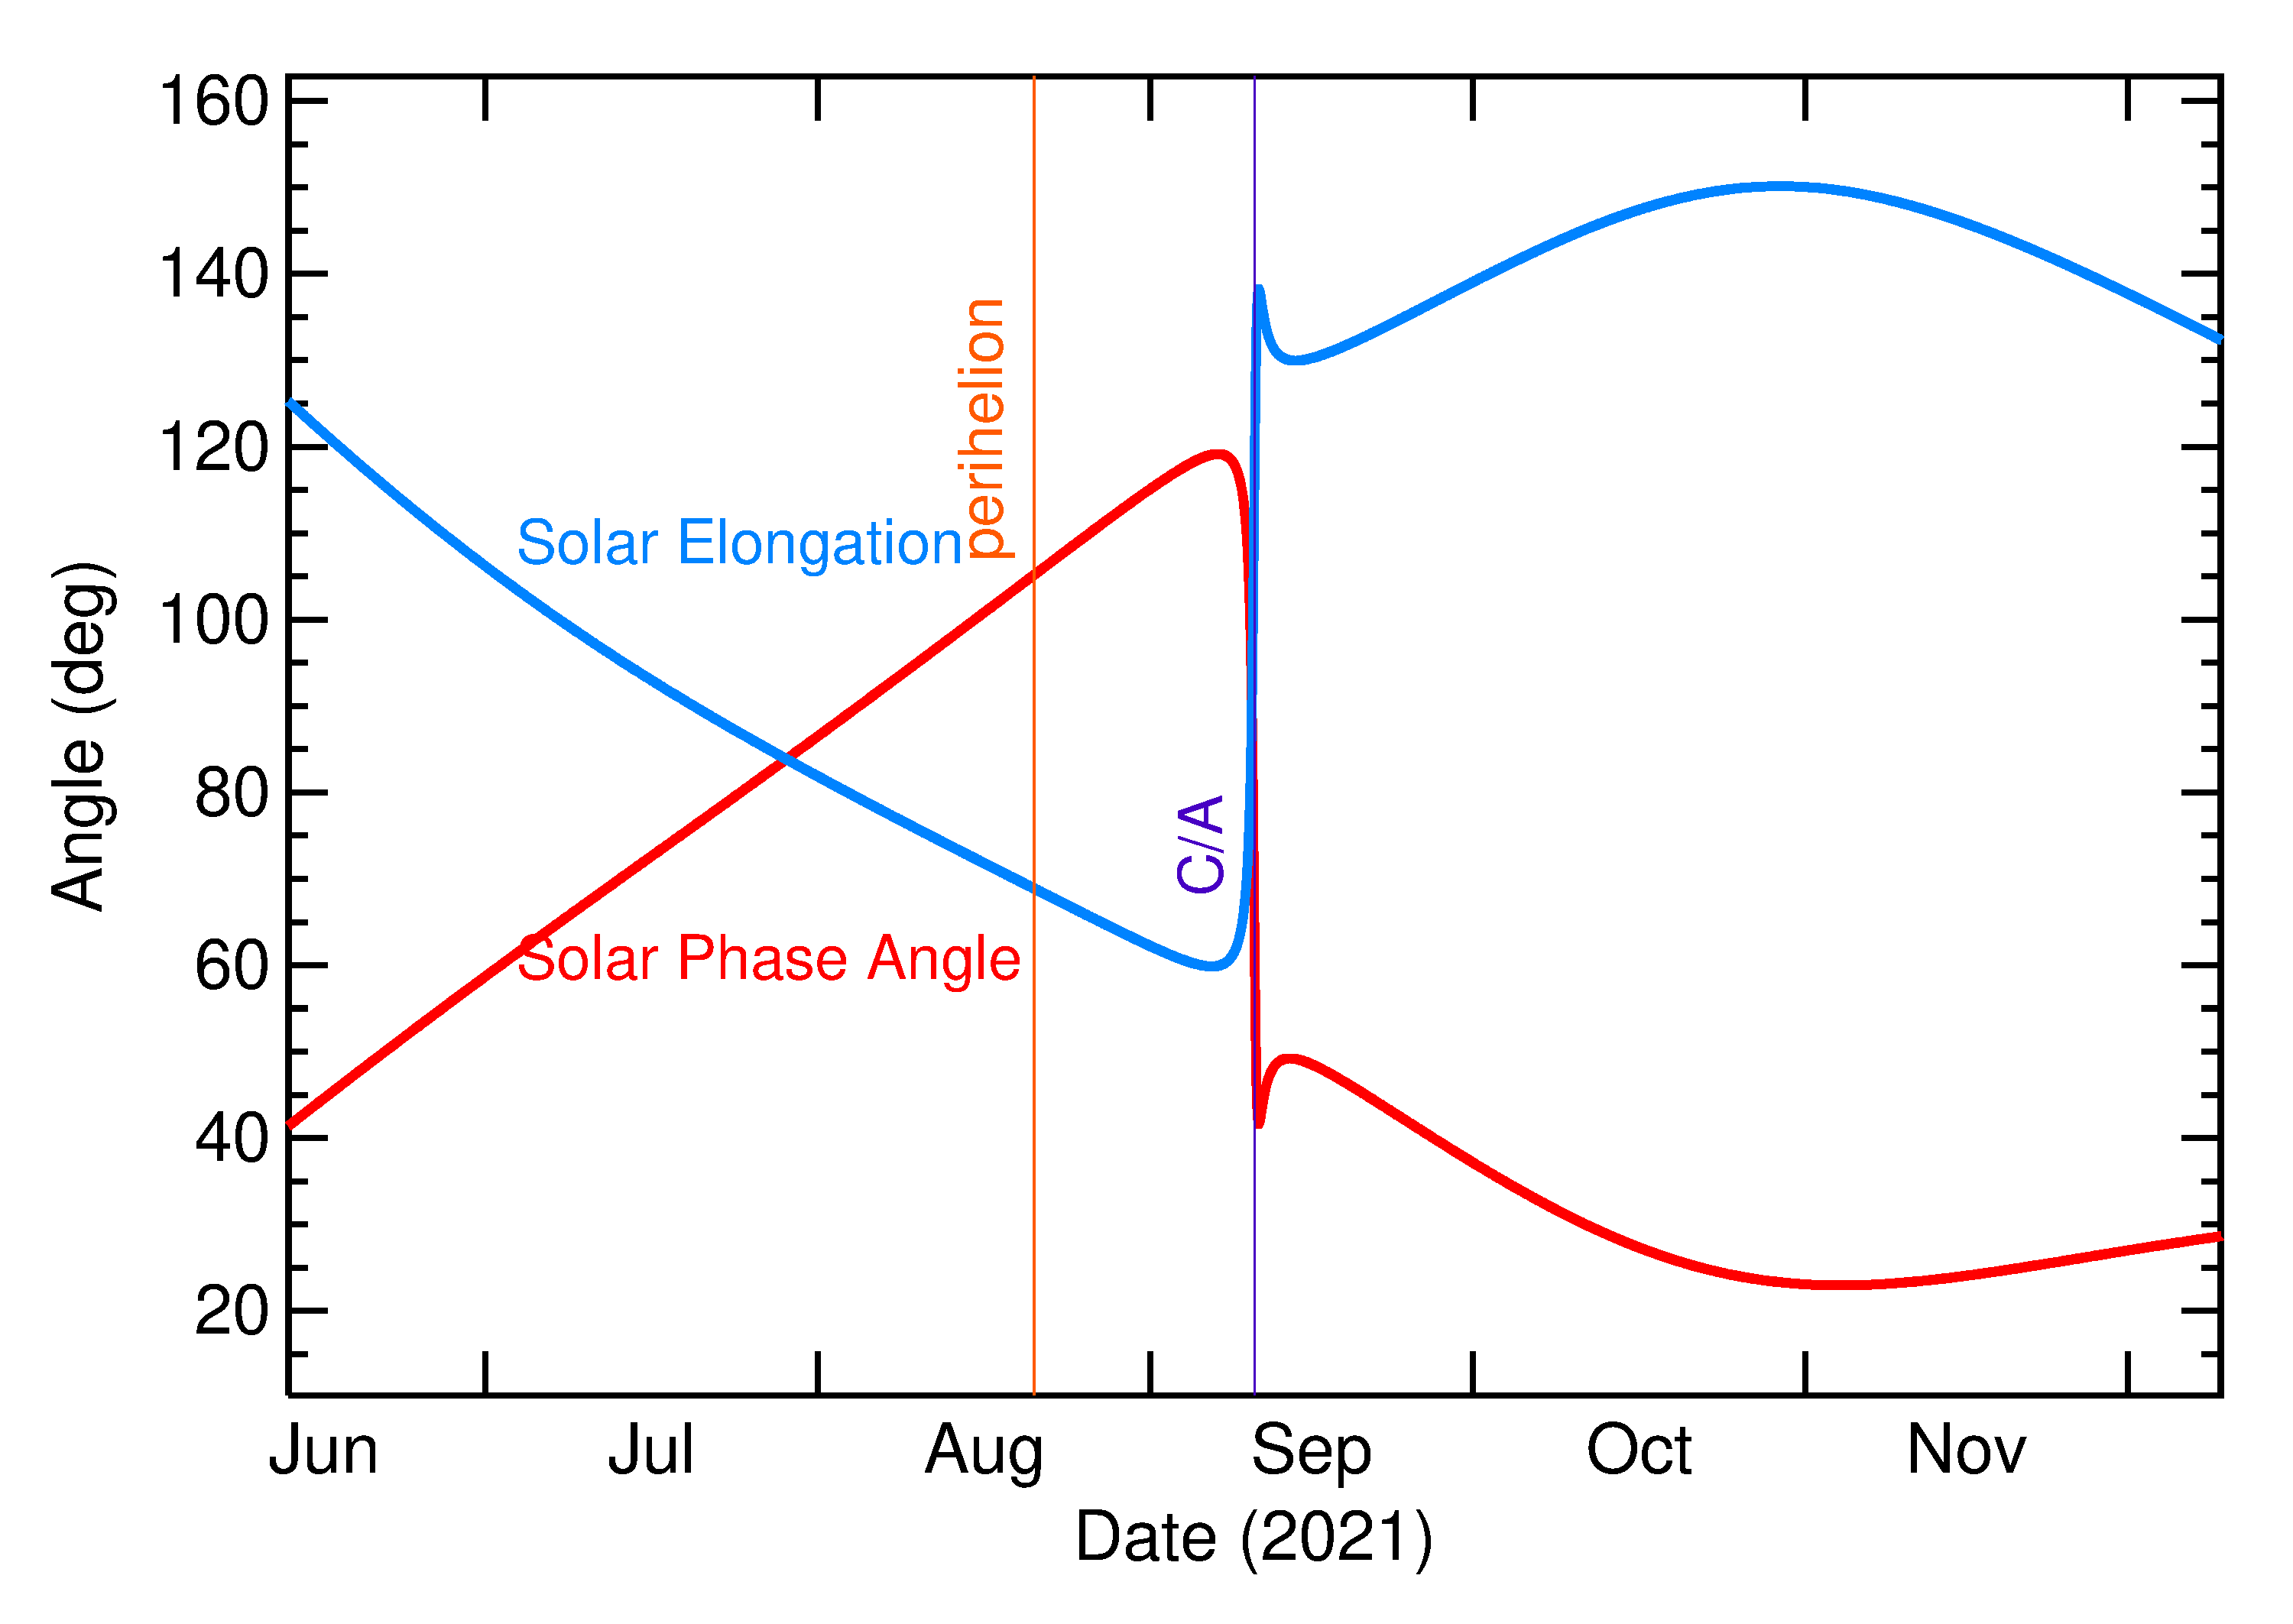 Solar Elongation and Solar Phase Angle of 2021 RB6 in the months around closest approach